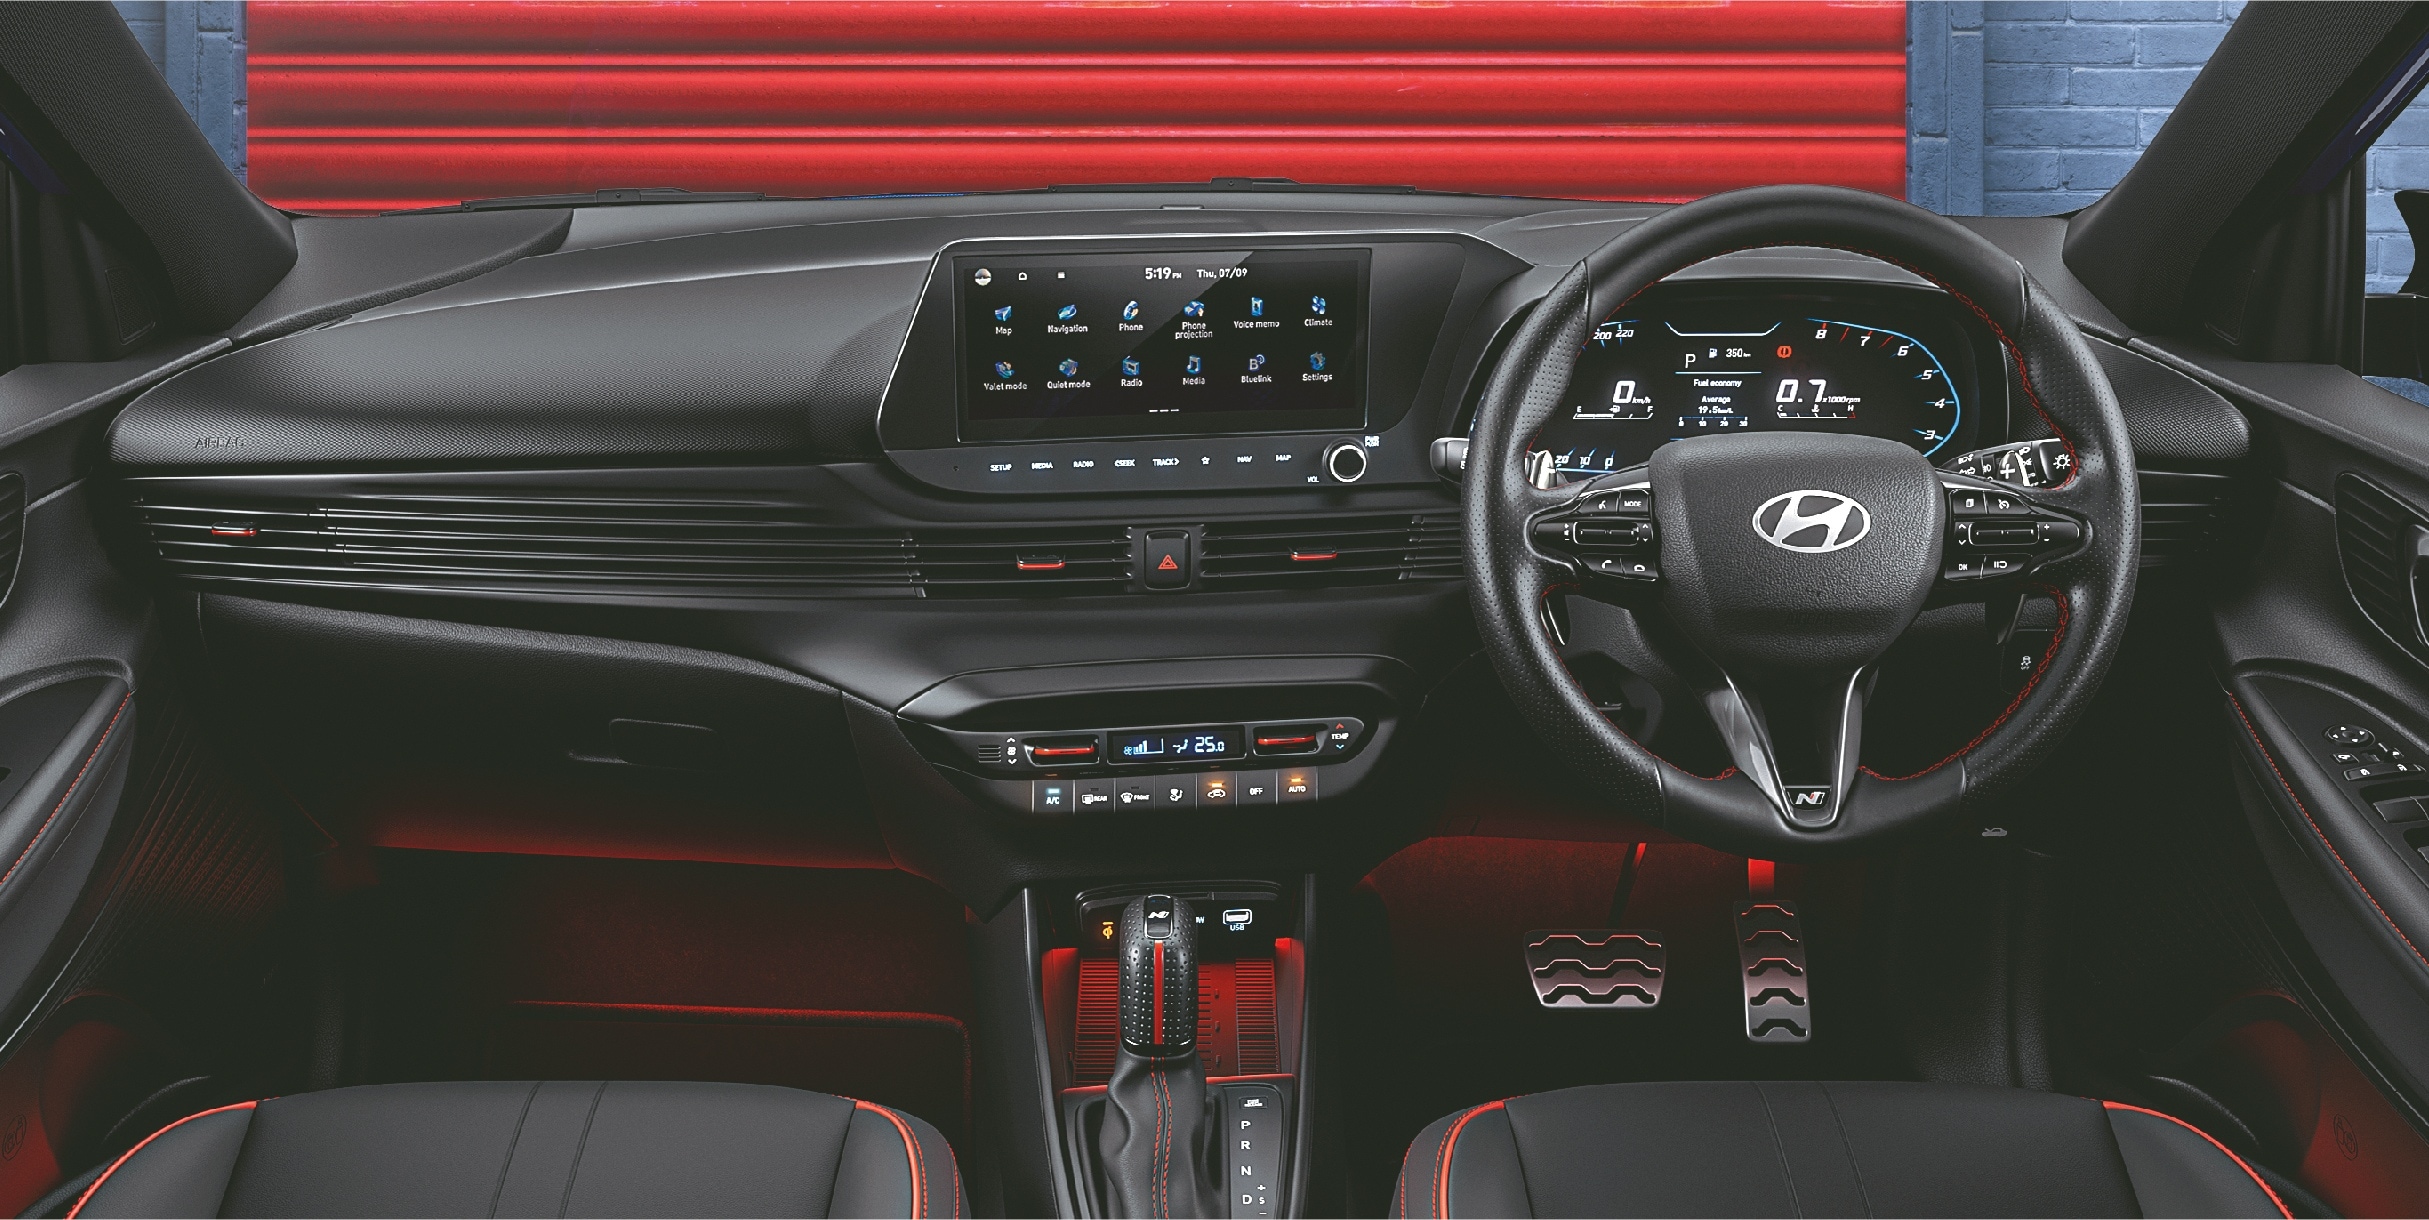 The cabin gets an all-black interior with red inserts, leather upholstery and red ambient lighting